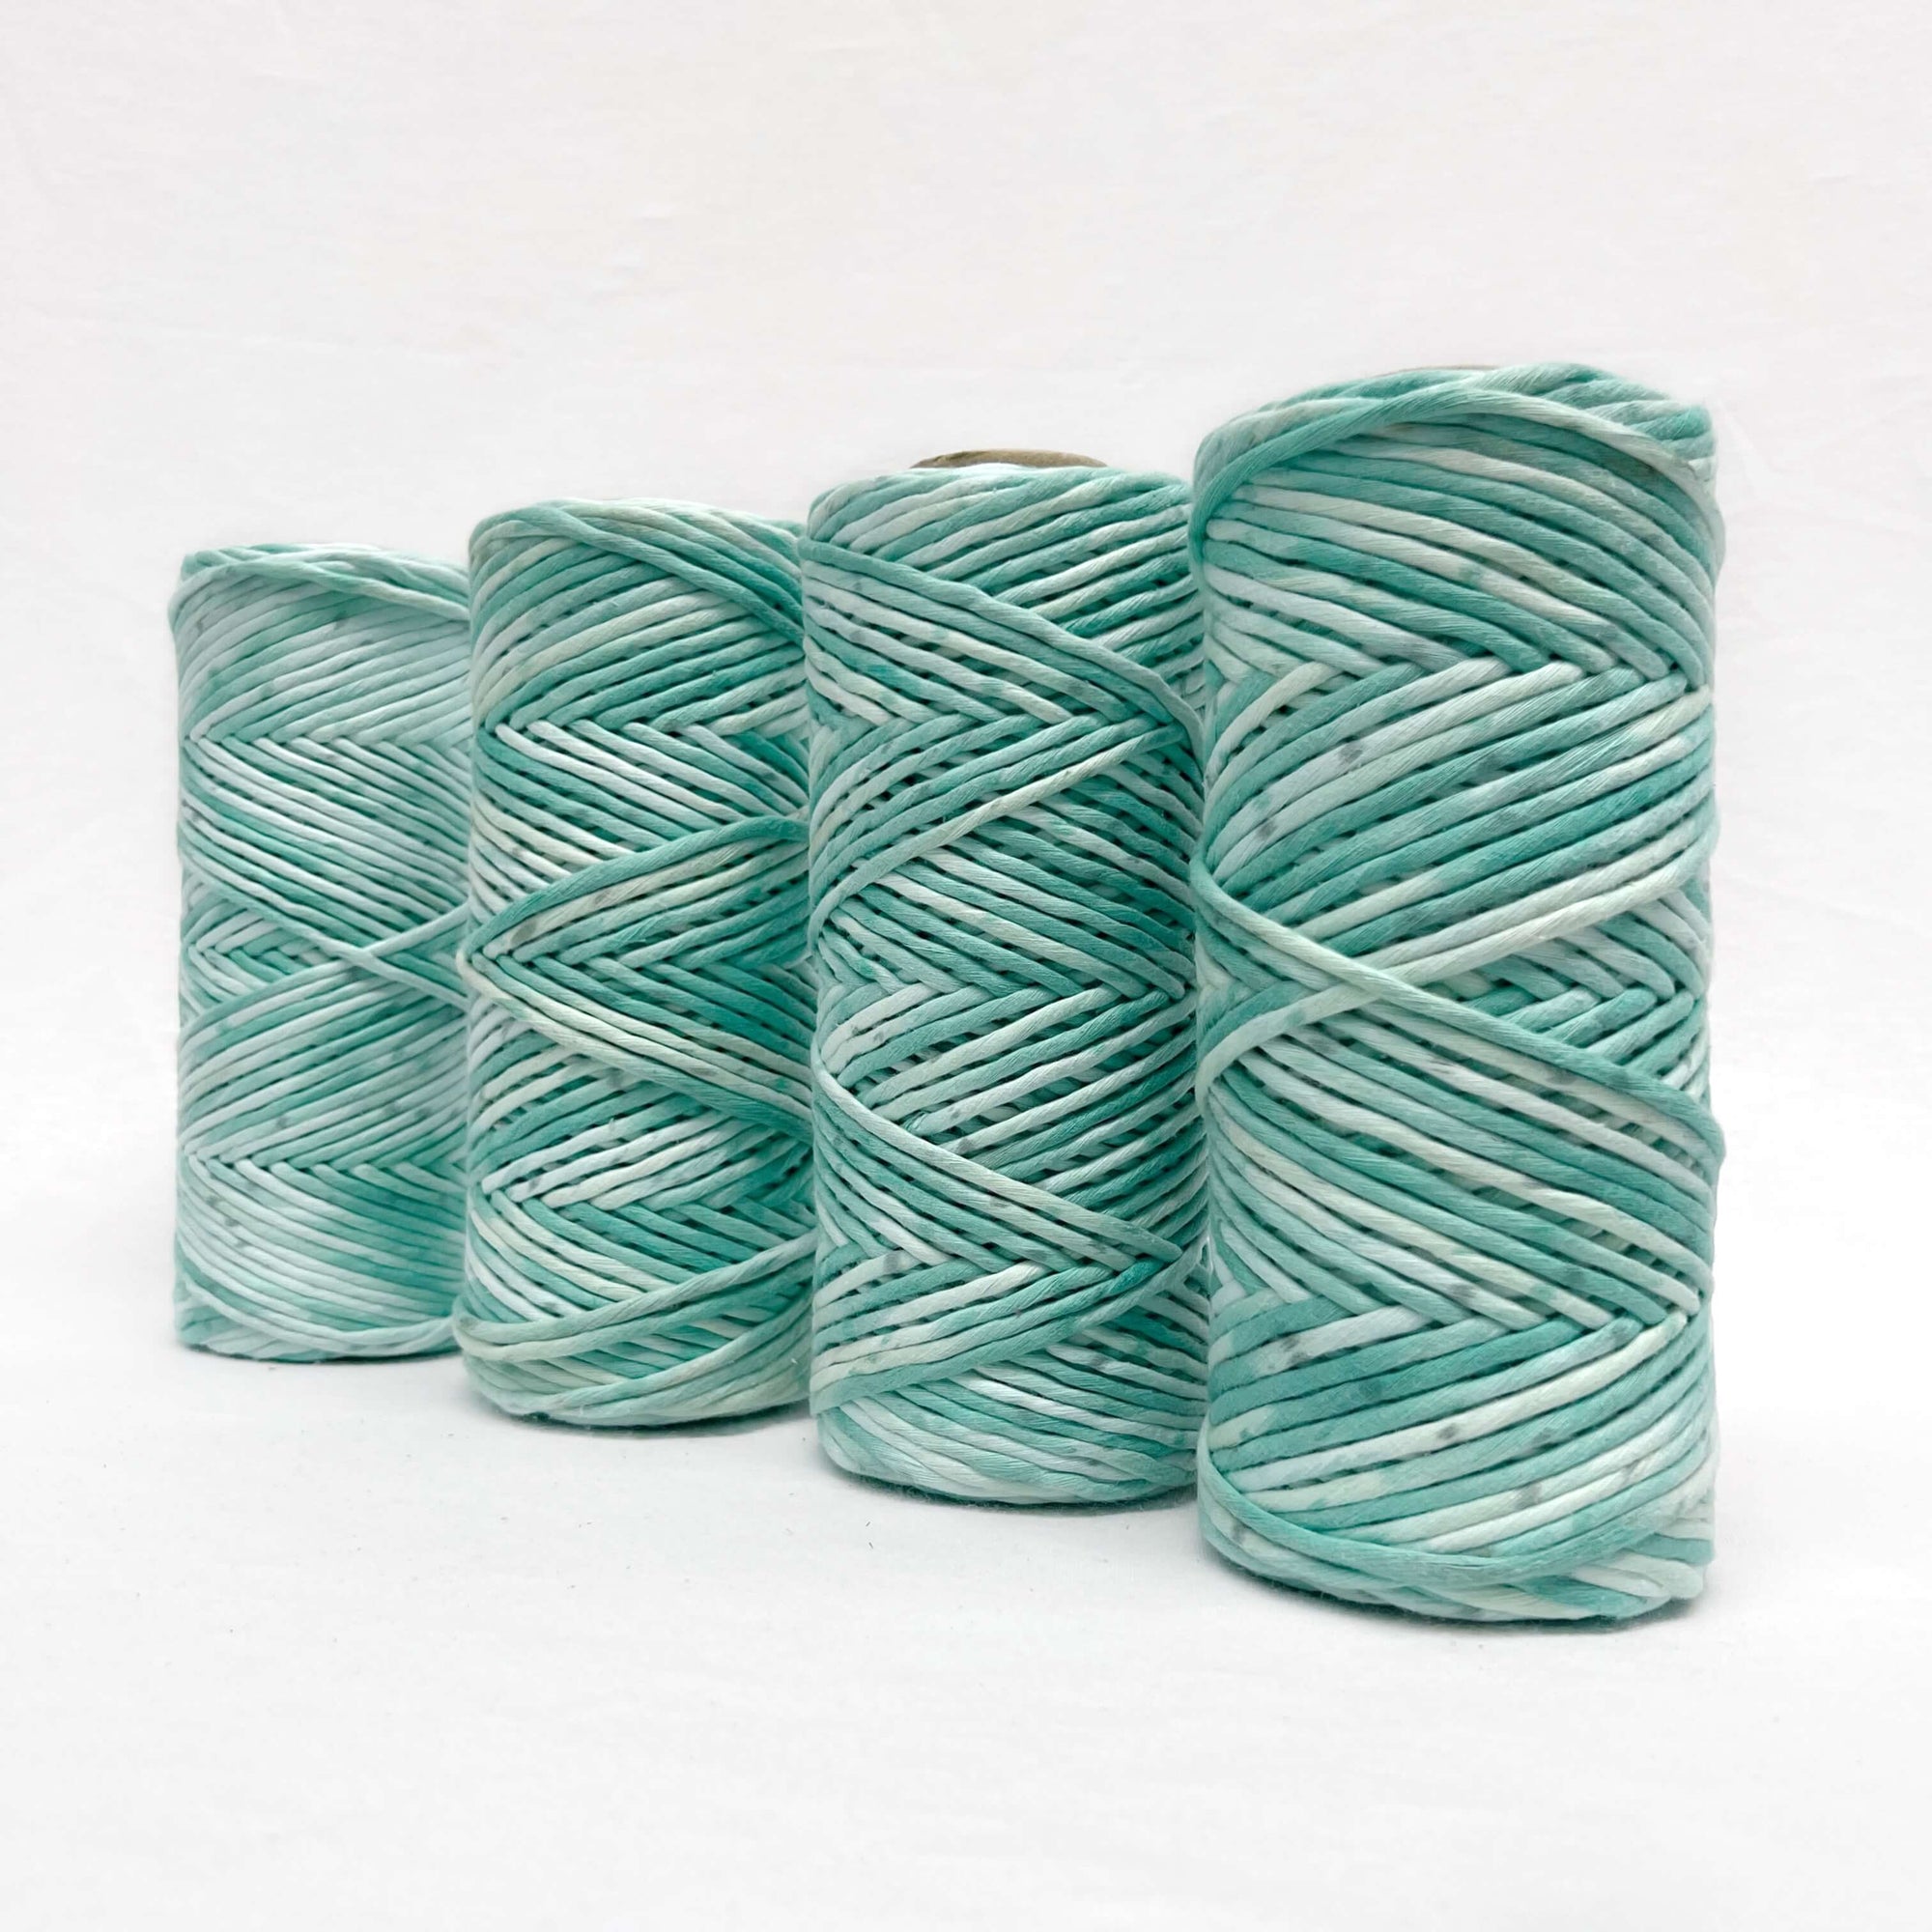 green macrame rope standing in line of four with white background